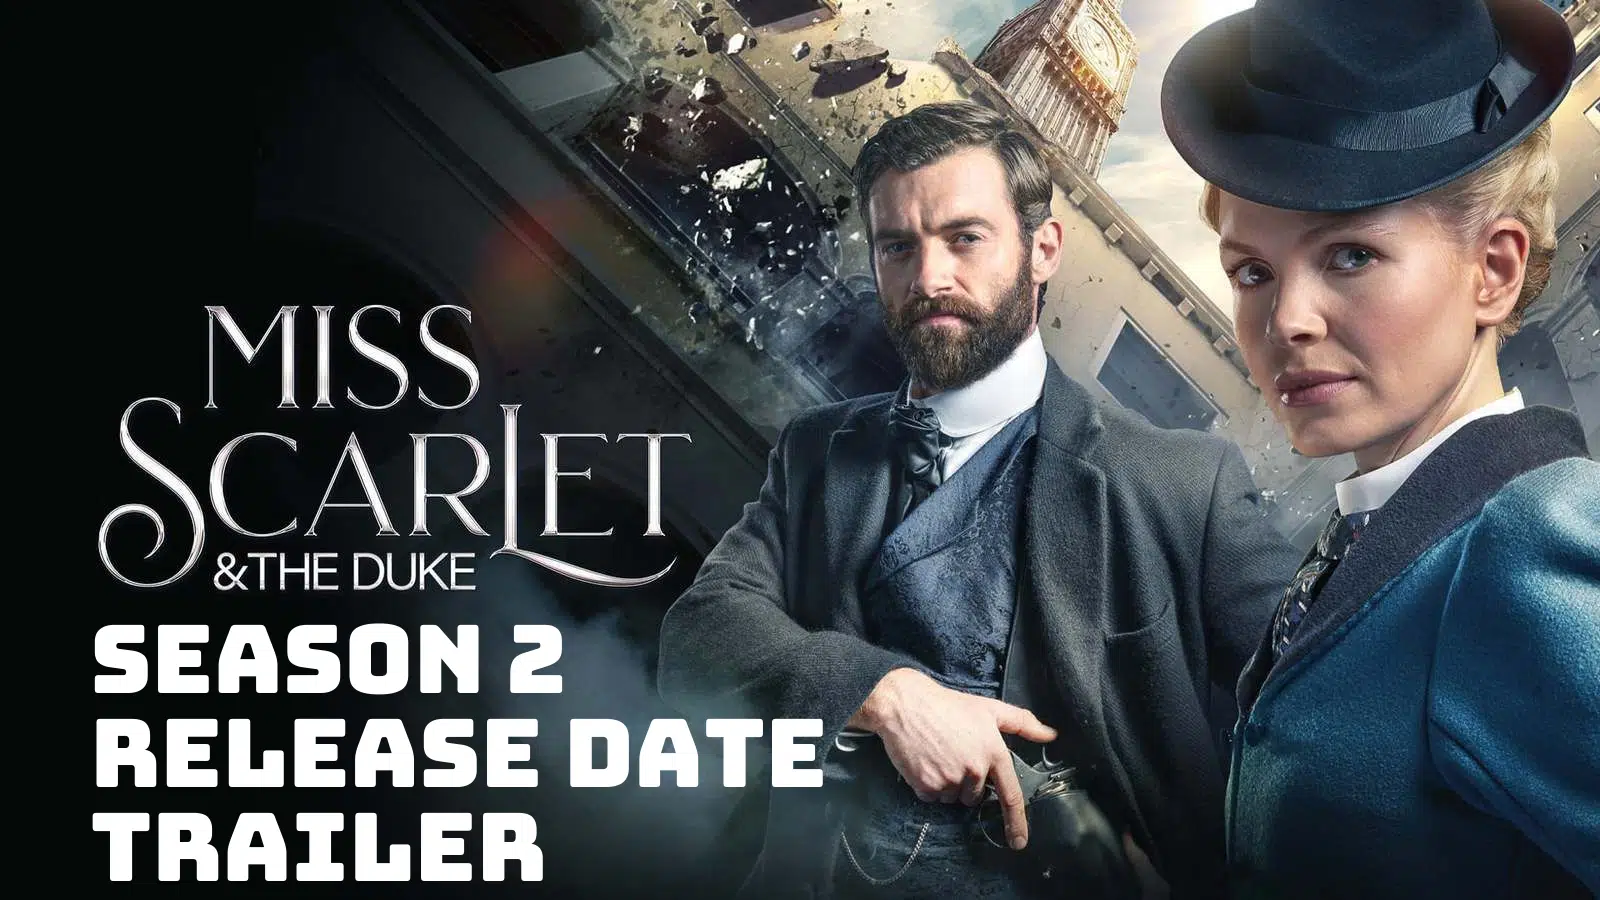 Miss Scarlet and the Duke Season 2 Release Date, Trailer - Is it Canceled?